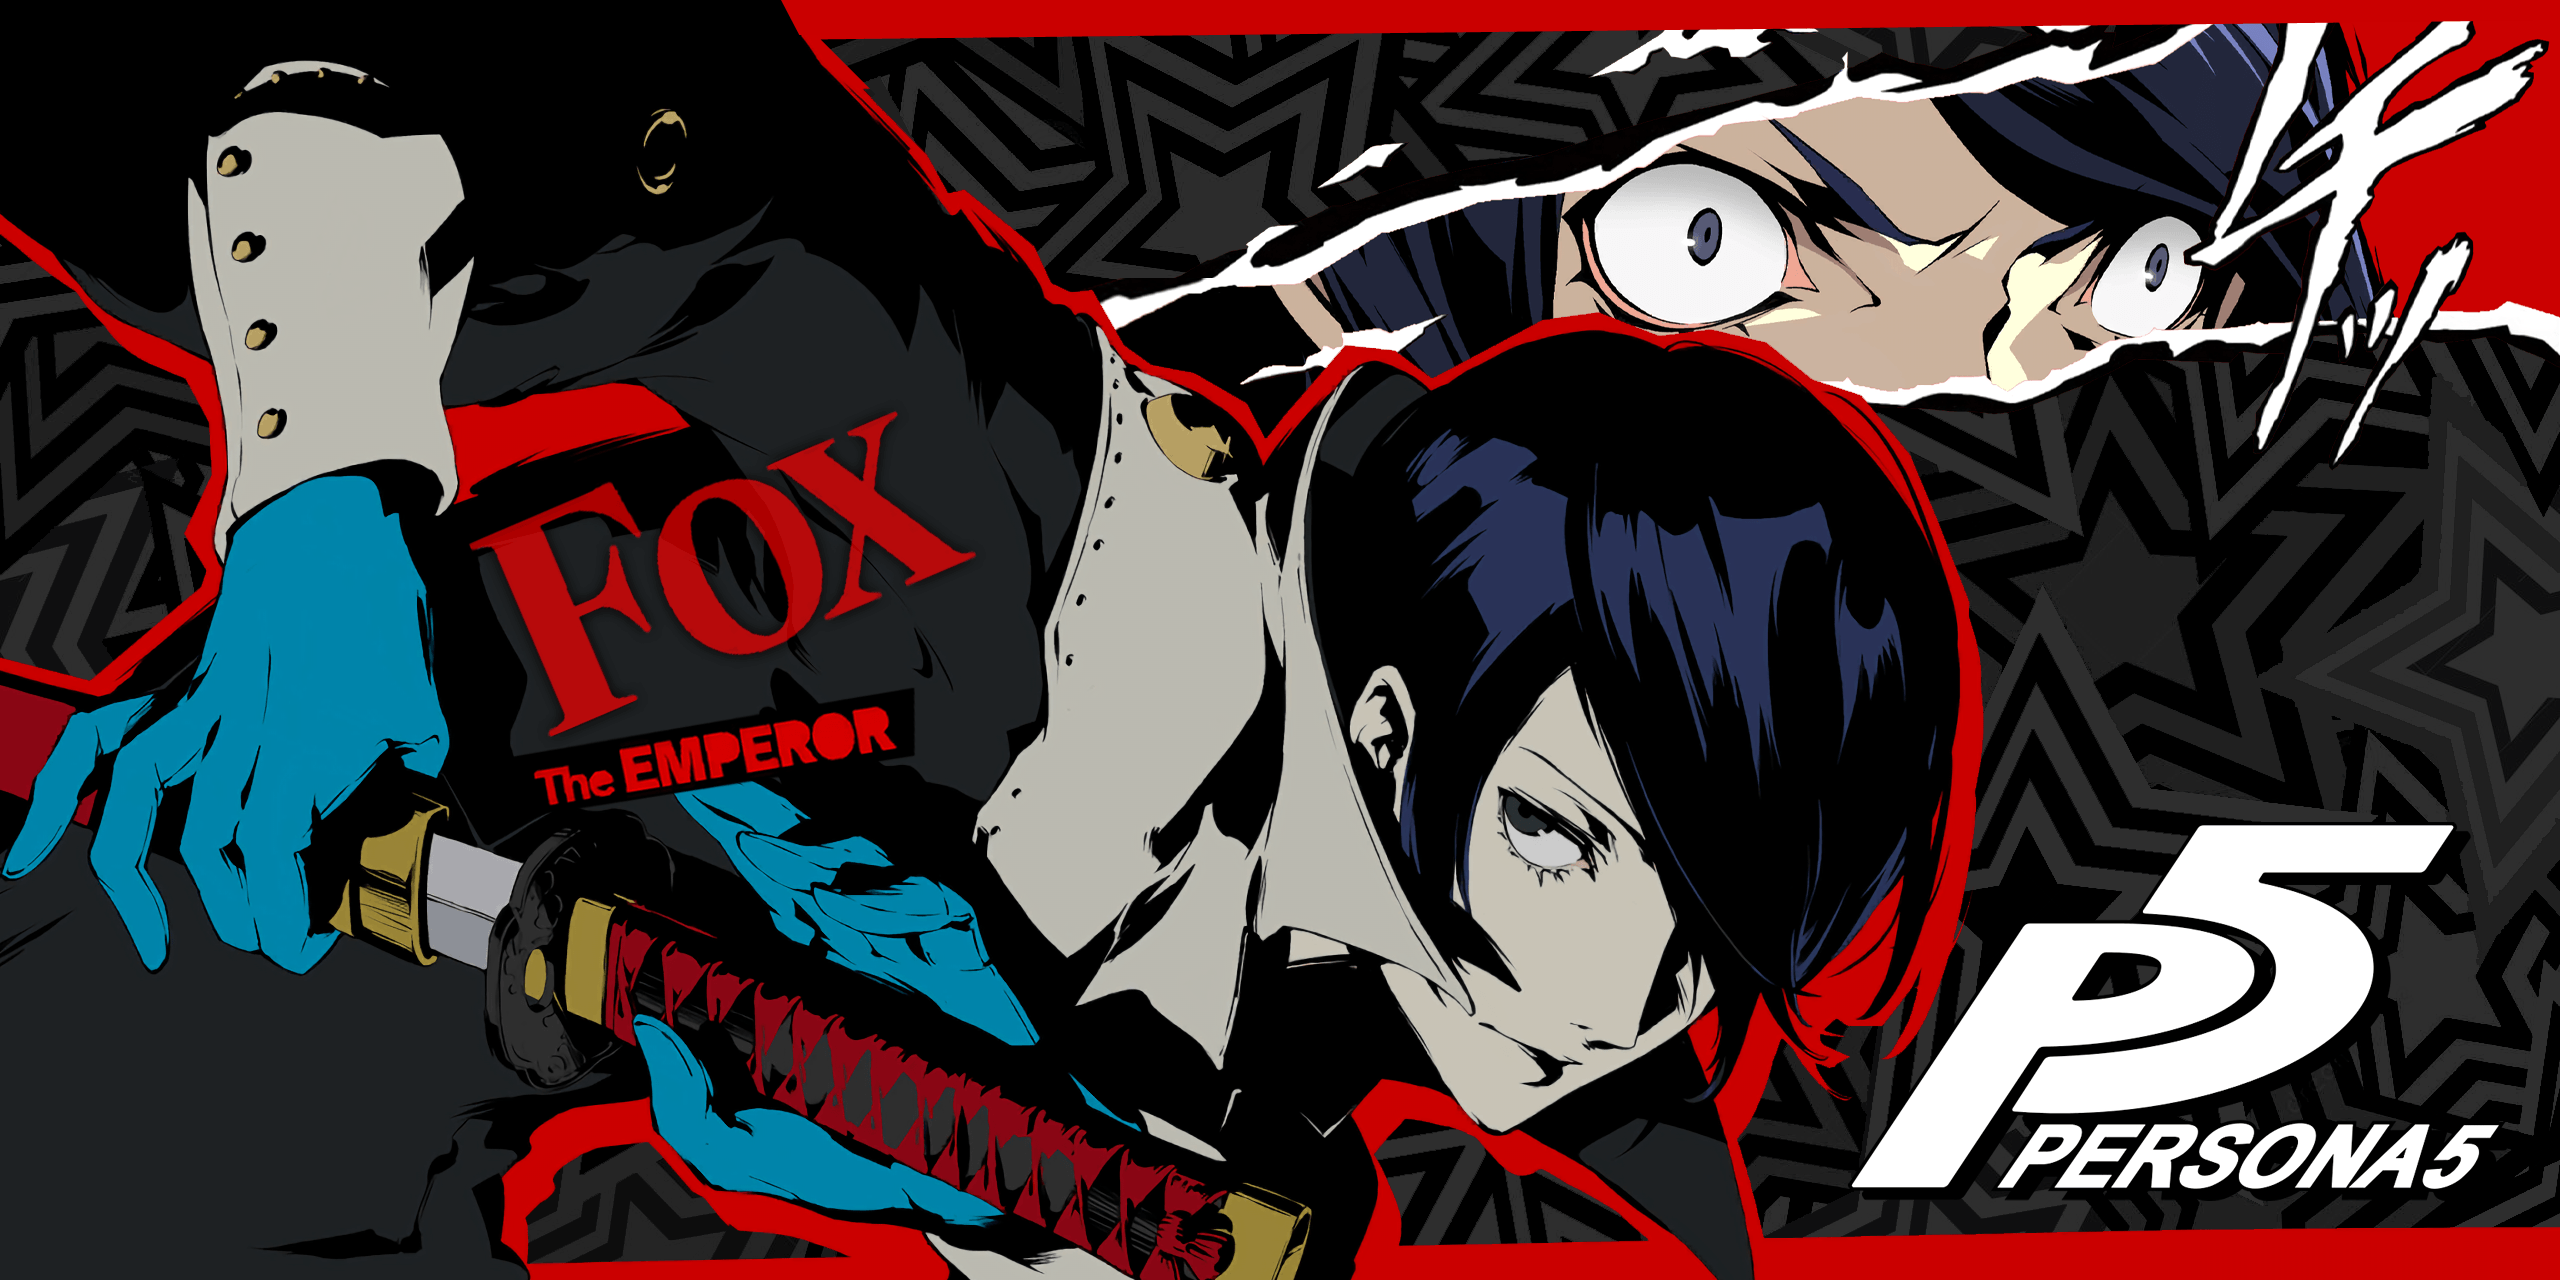 I made some Persona Wallpapers